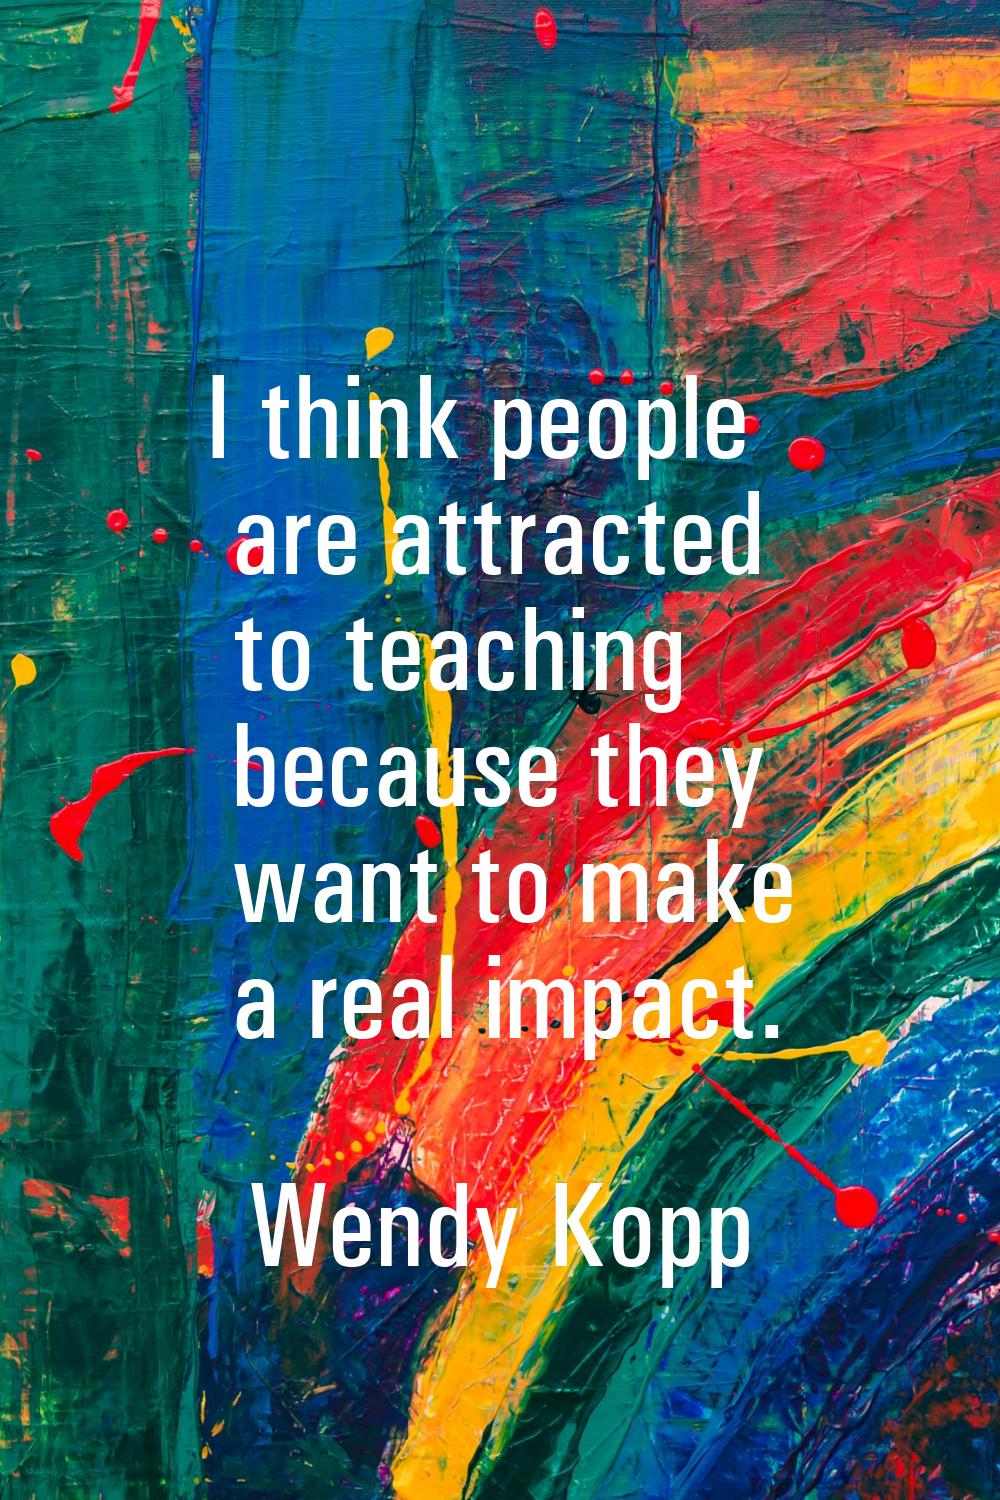 I think people are attracted to teaching because they want to make a real impact.